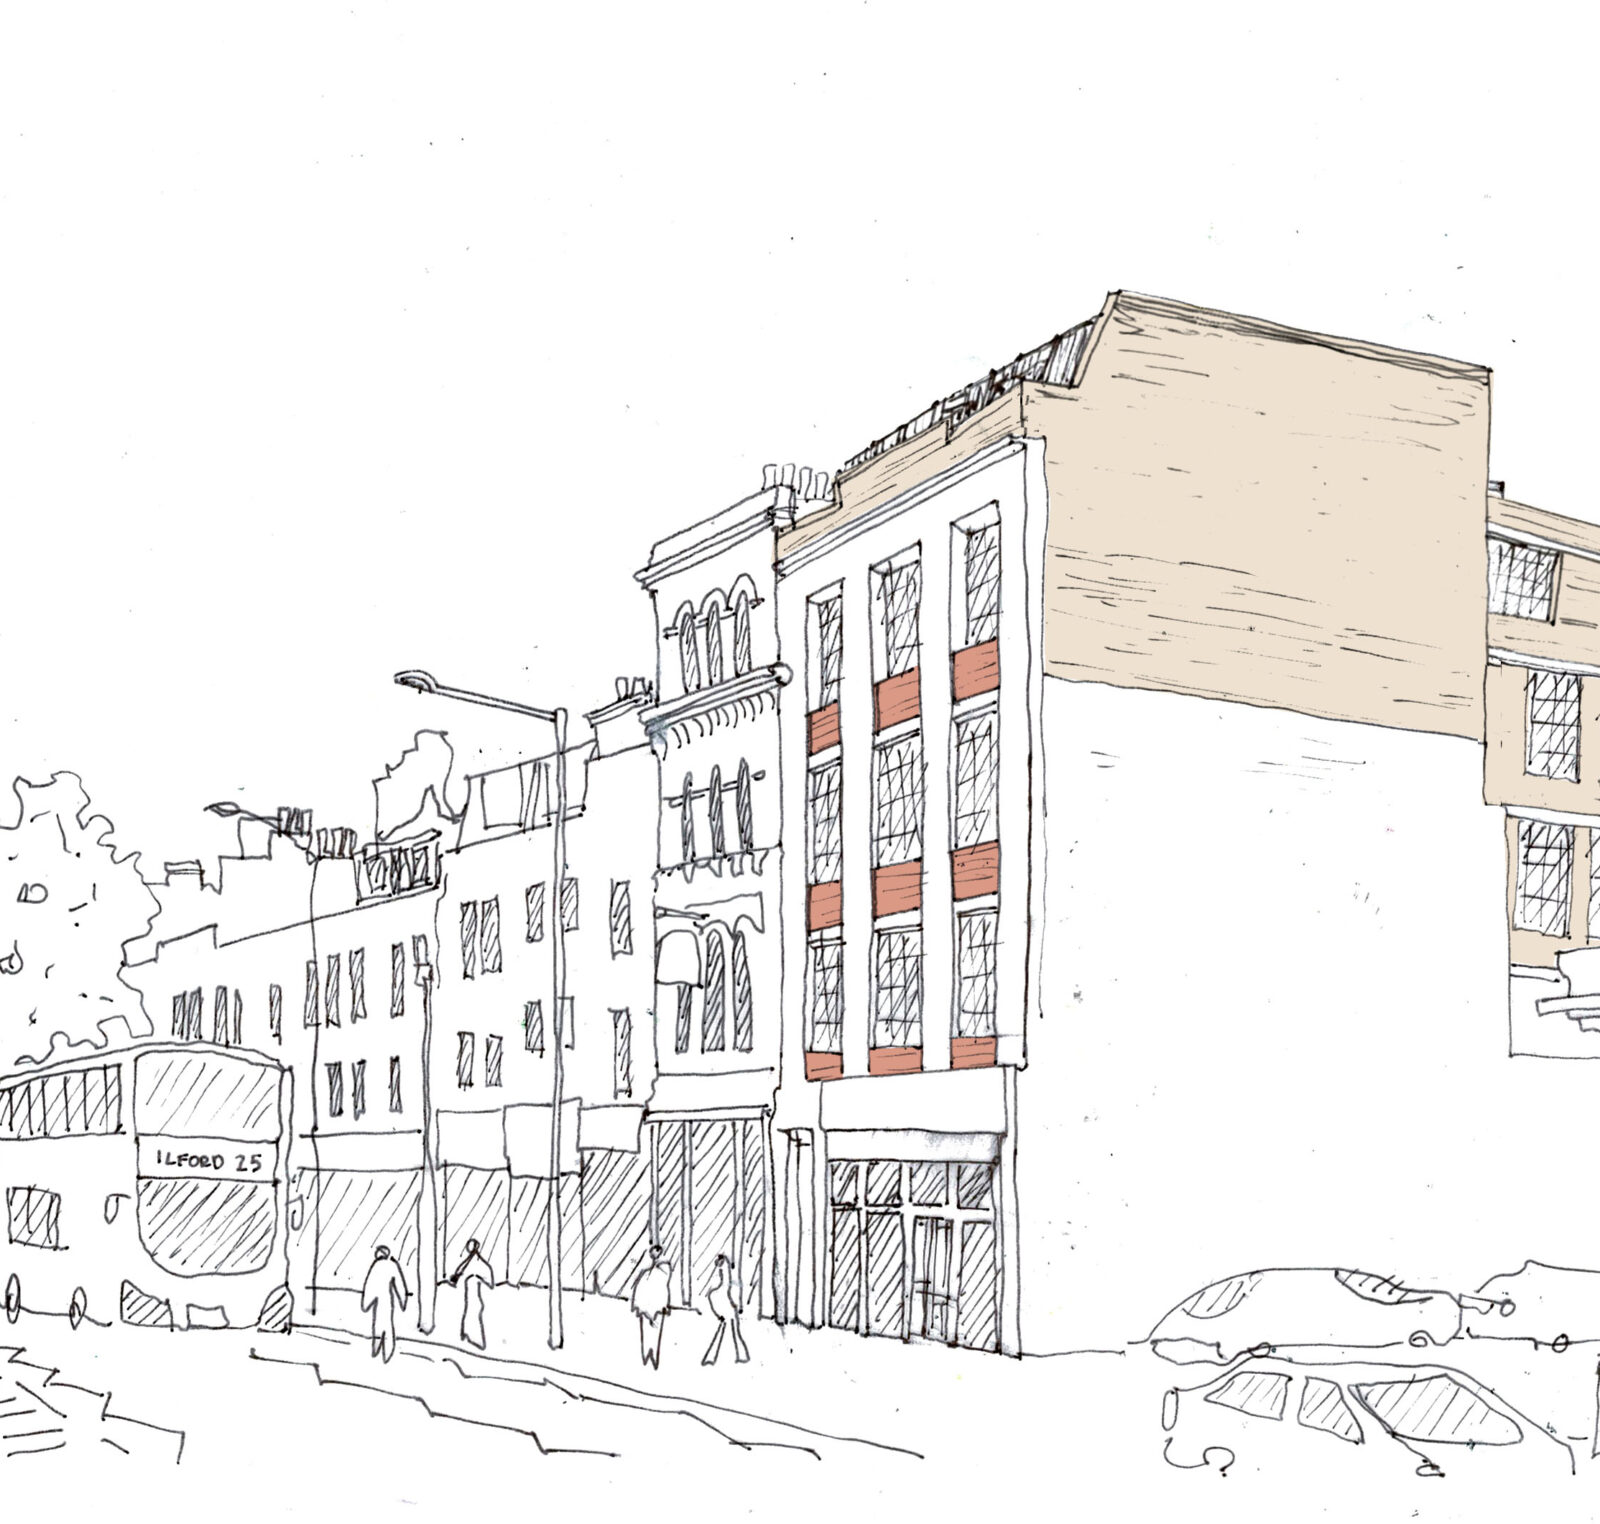 Sketch visual of proposed development from street